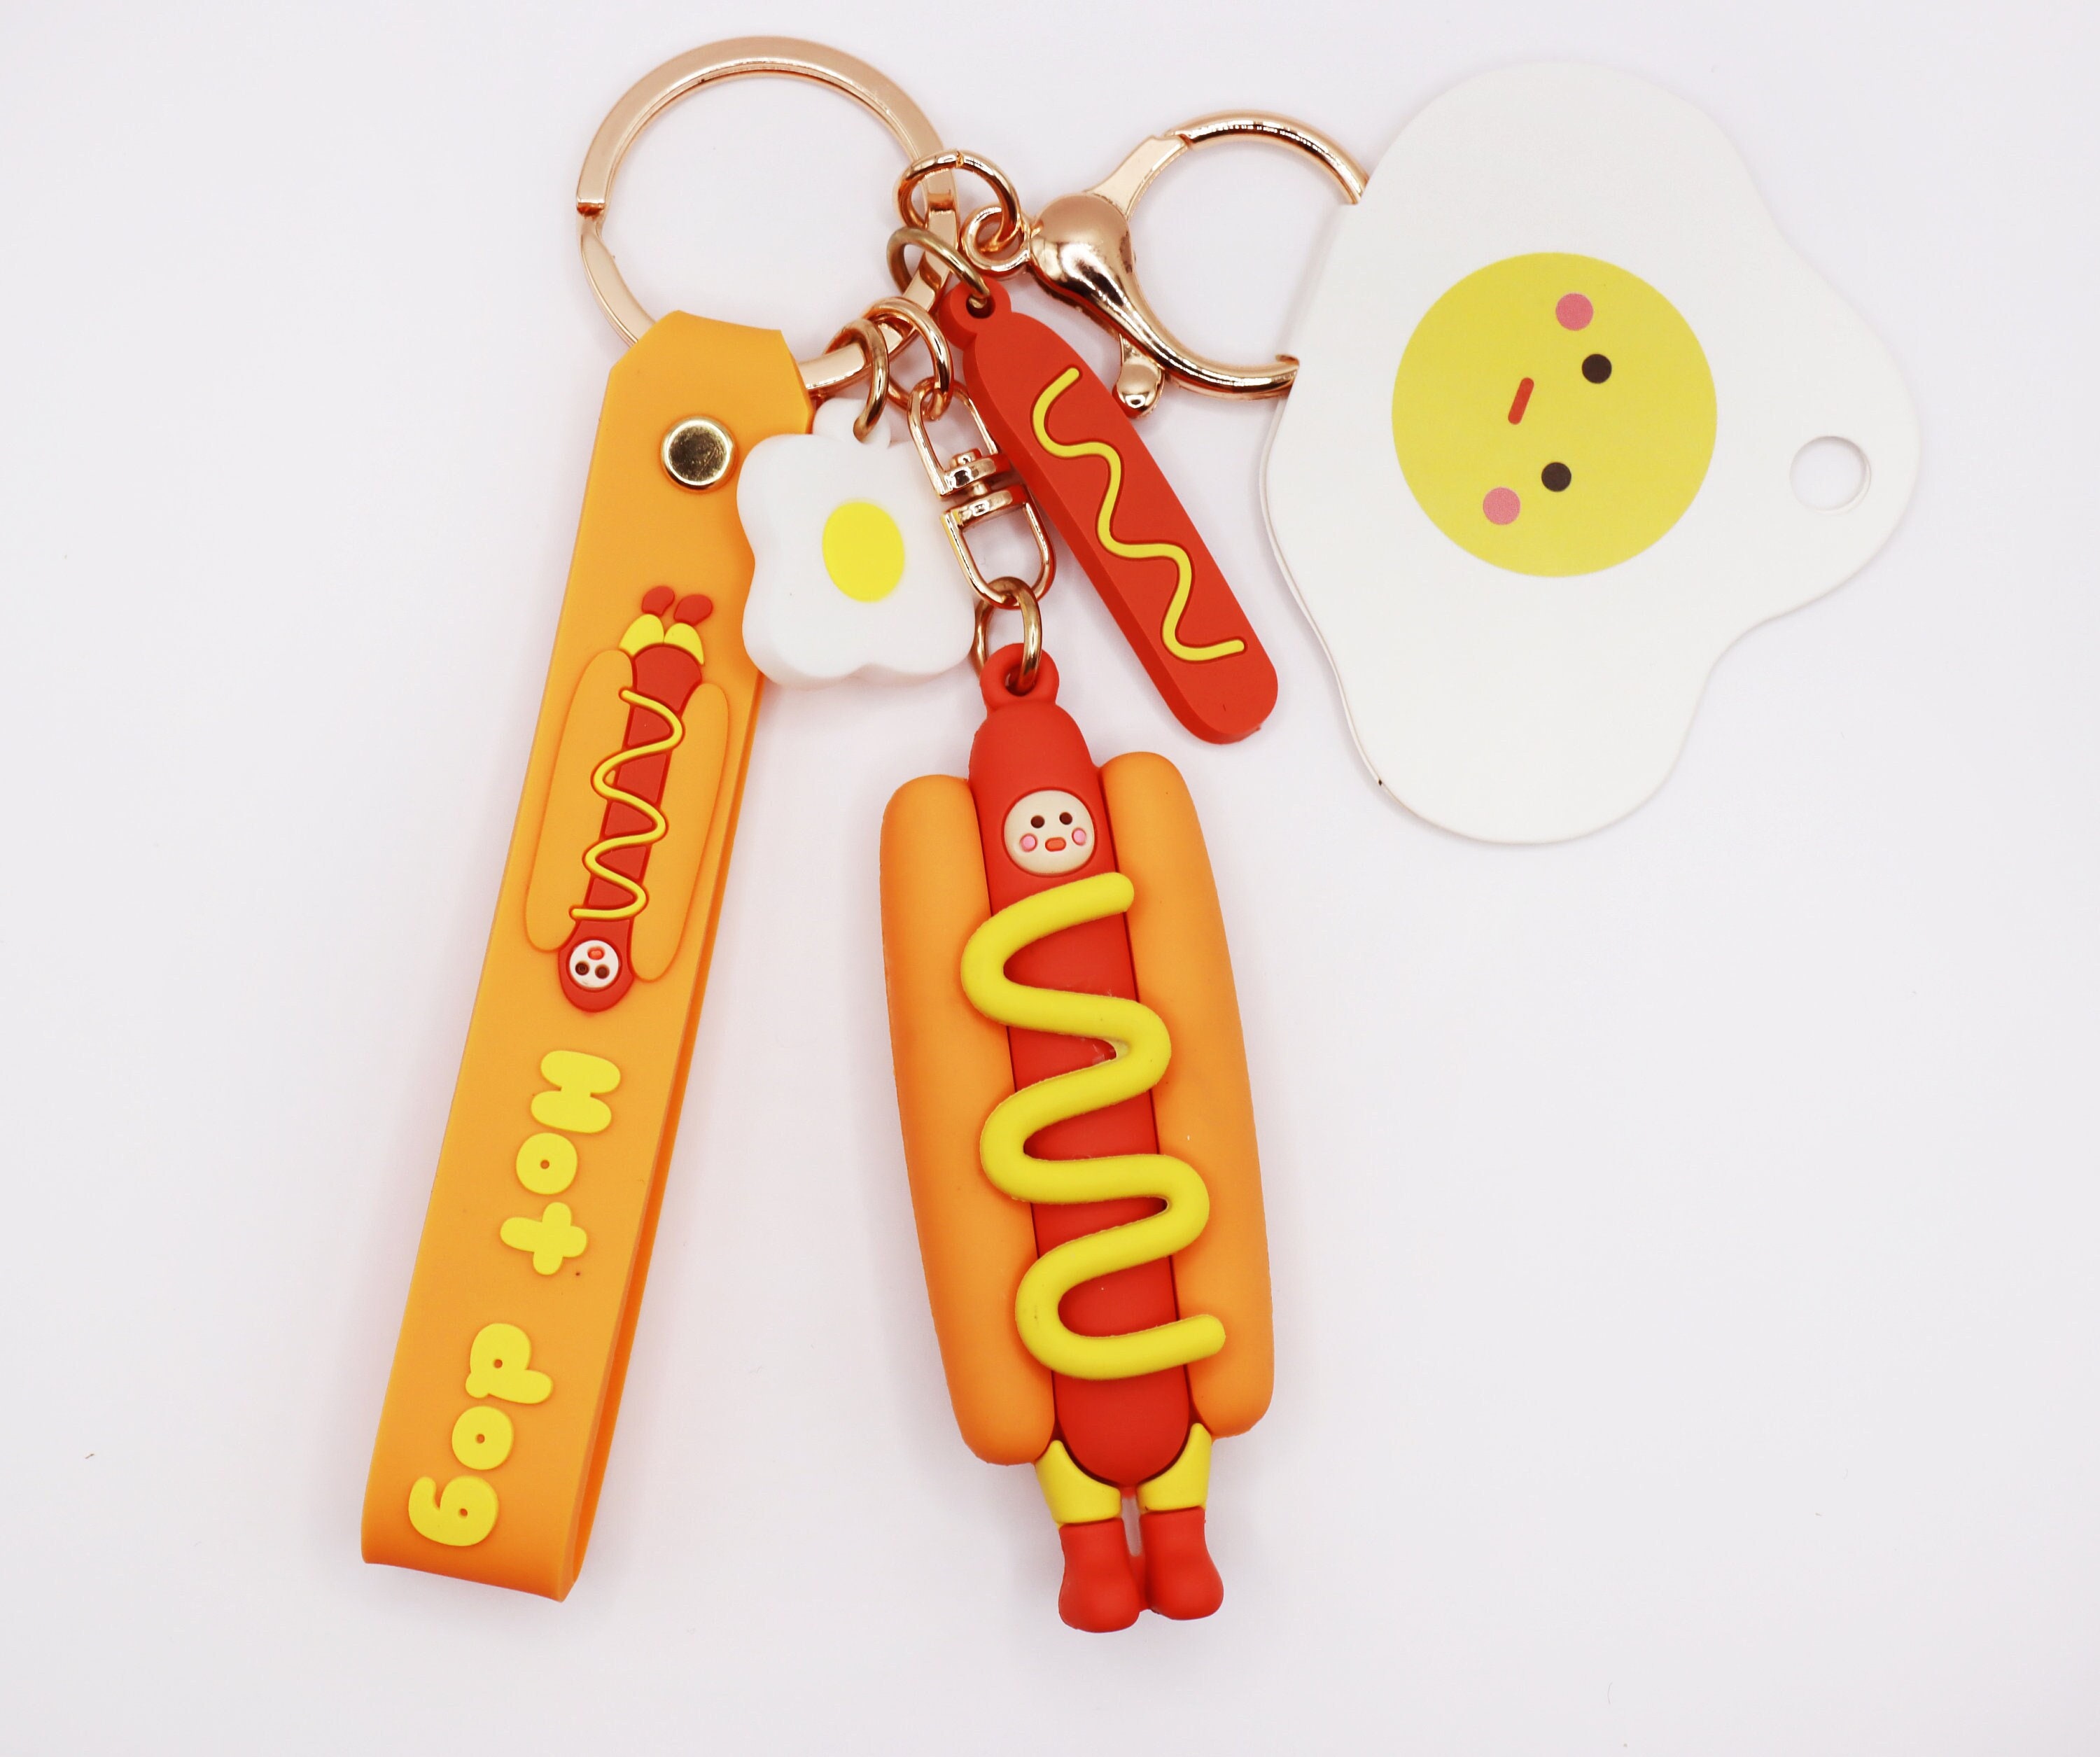 Hot Dogs Keychain  Food Keychain or Funny Keychain that shows a